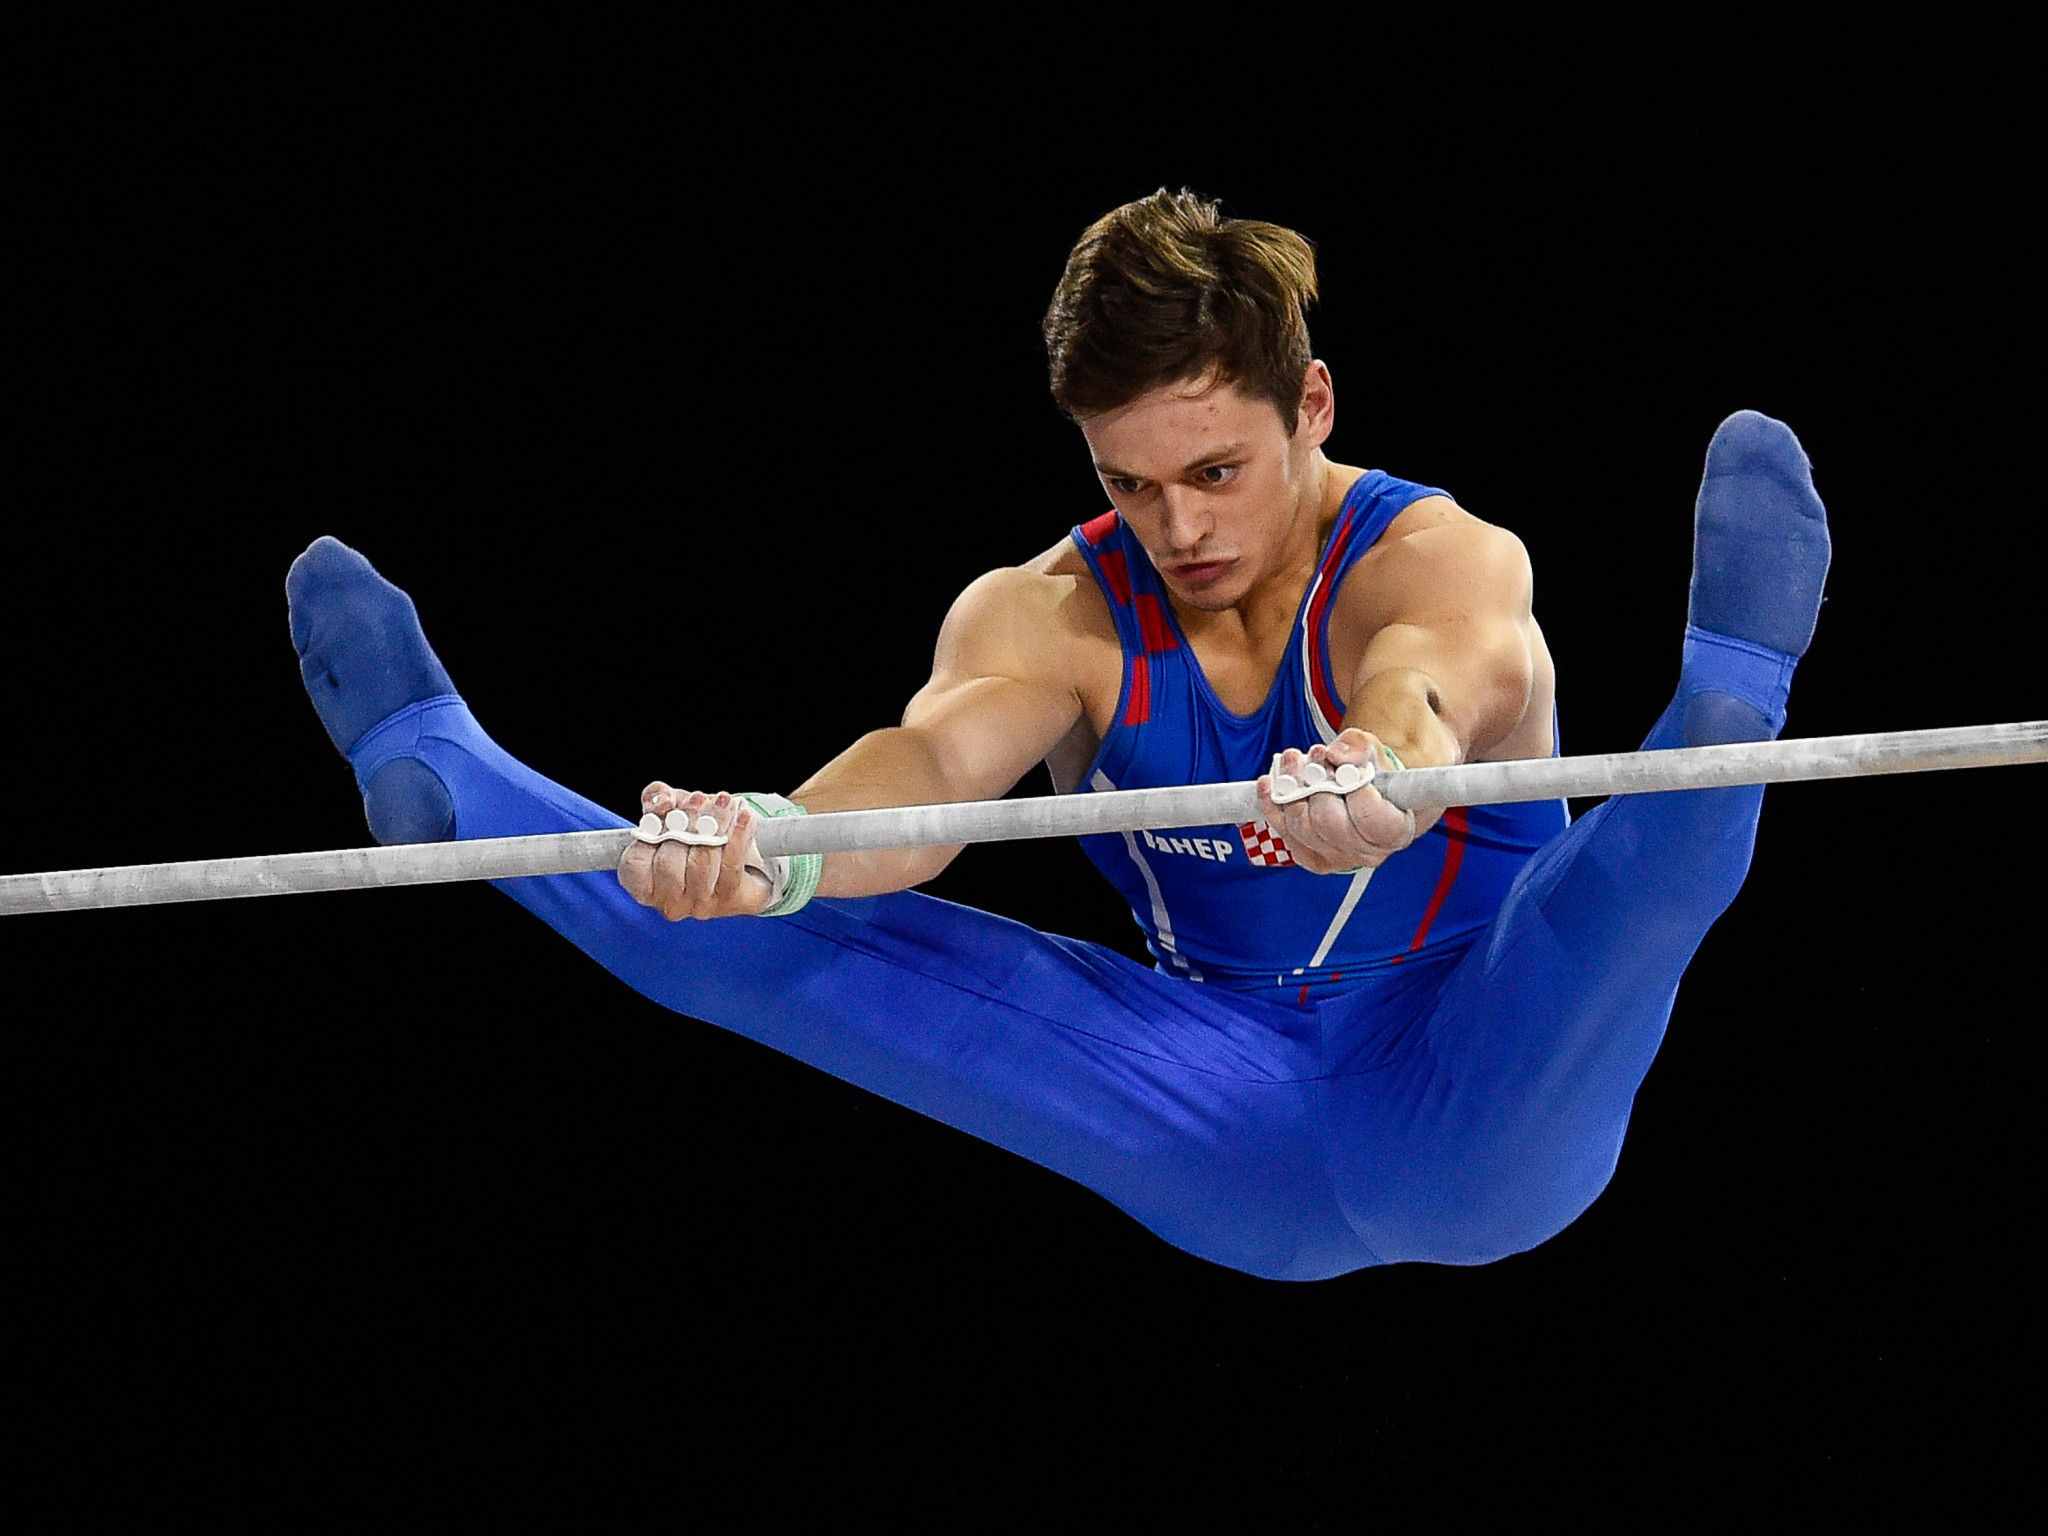 Croatian Tin Srbić was second in high bar qualifying ©Getty Images